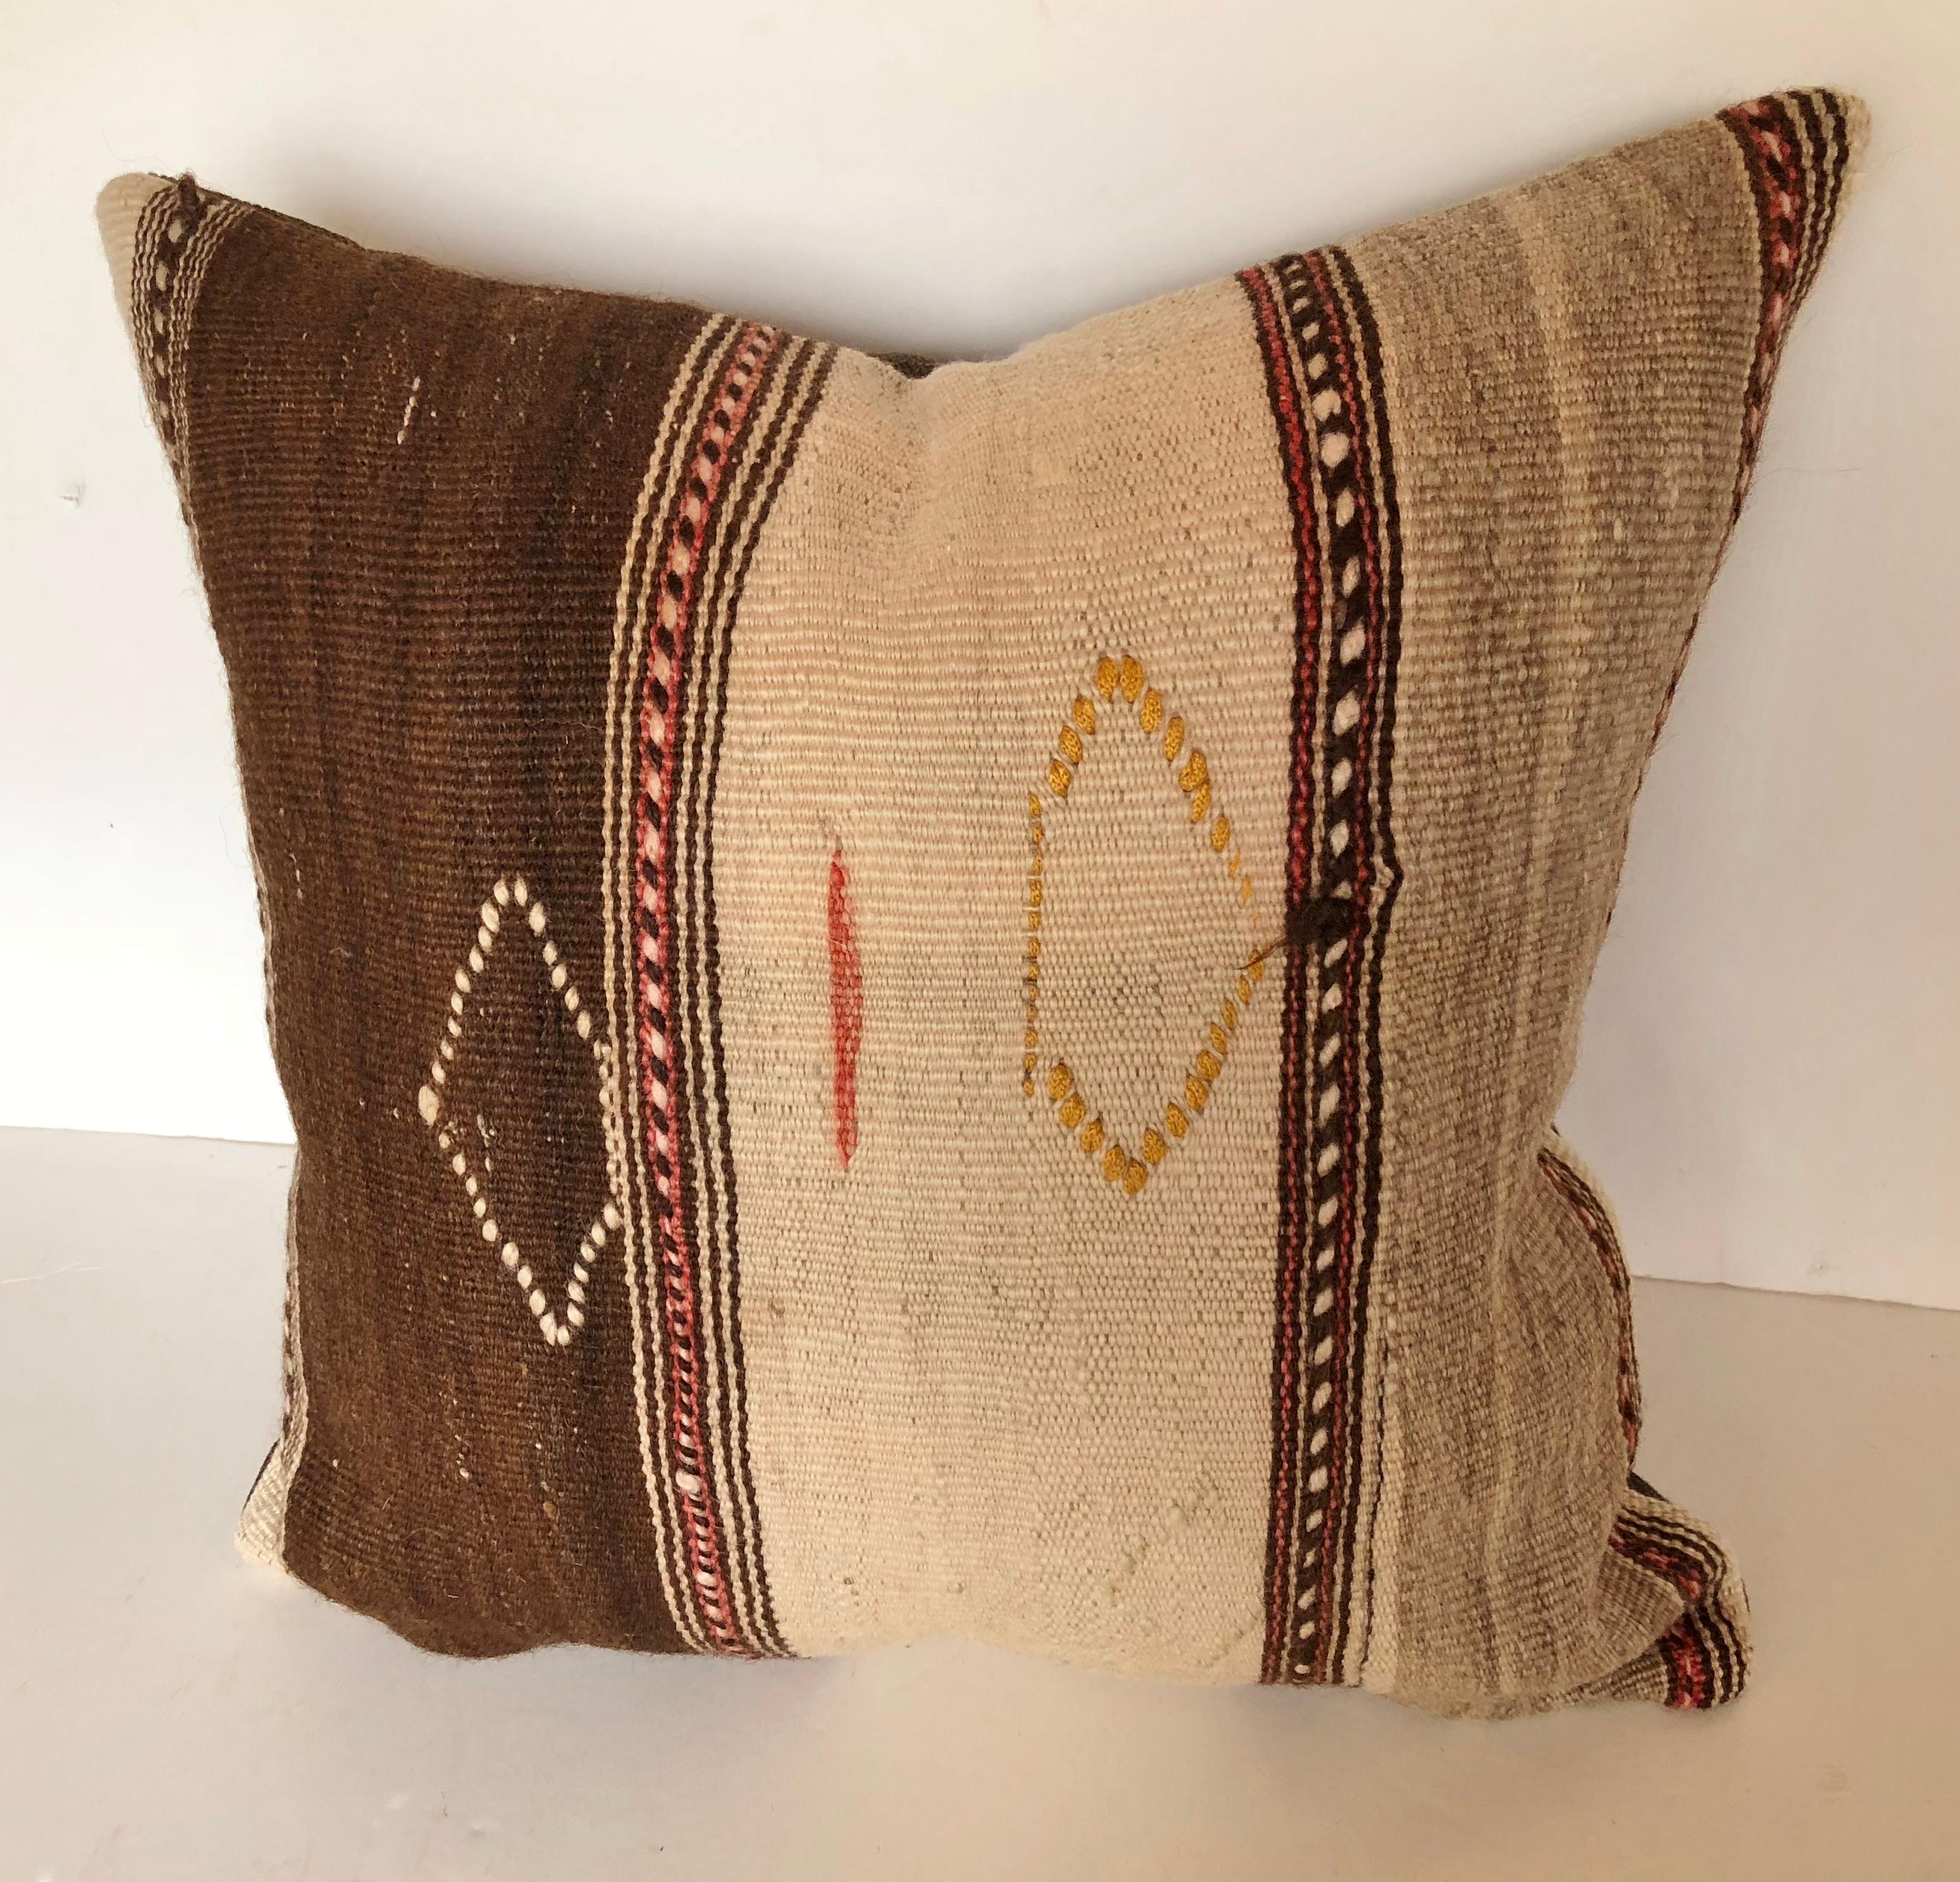 Hand-Woven Custom Pillows Cut from a Vintage Moroccan Wool Ourika Rug, Atlas Mountains